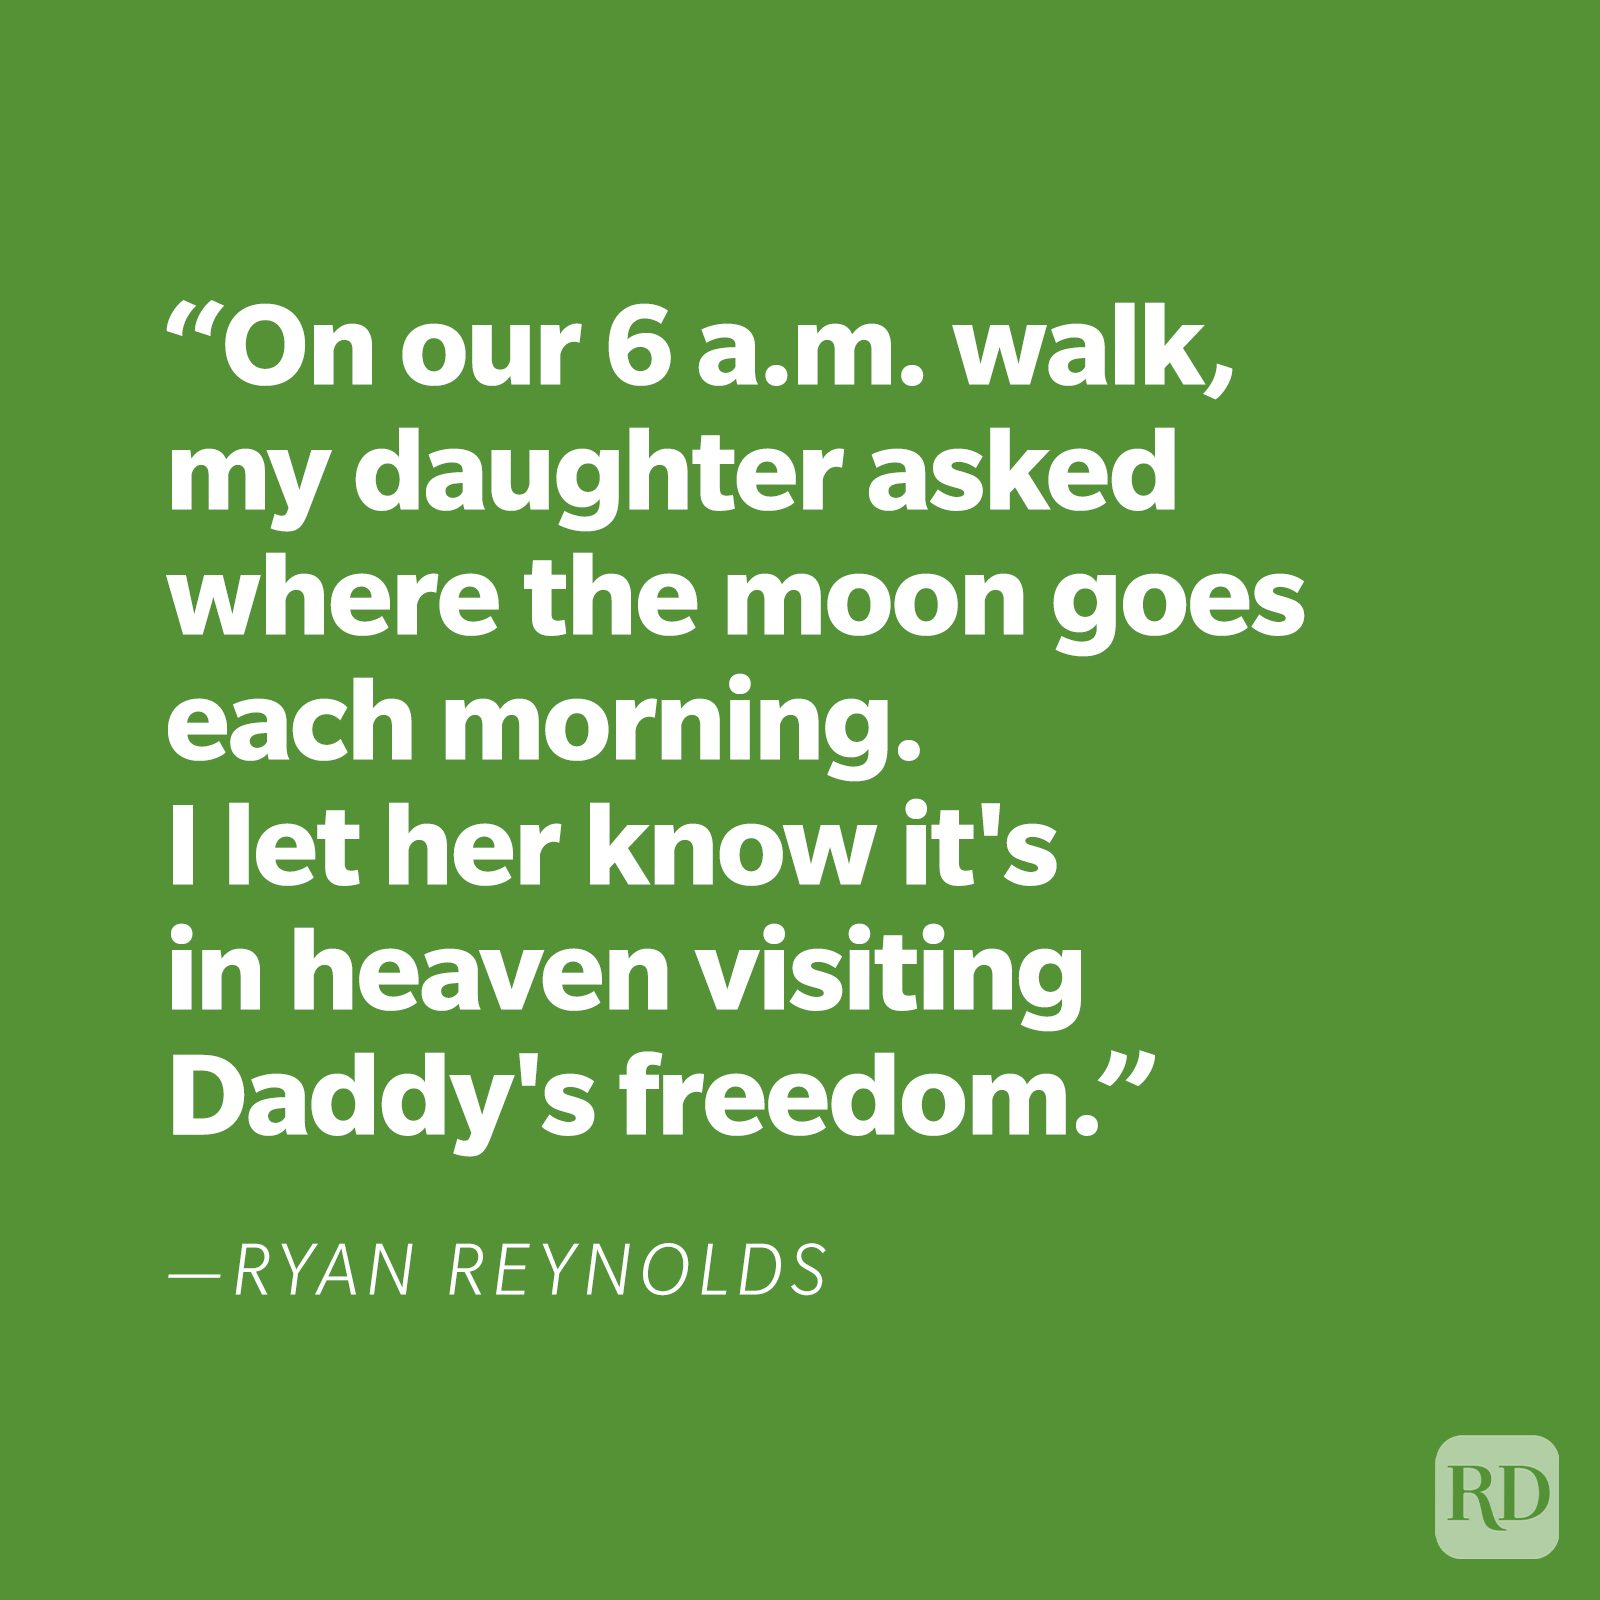 "On our 6 a.m. walk, my daughter asked where the moon goes each morning. I let her know it's in heaven visiting Daddy's freedom." —Ryan Reynolds